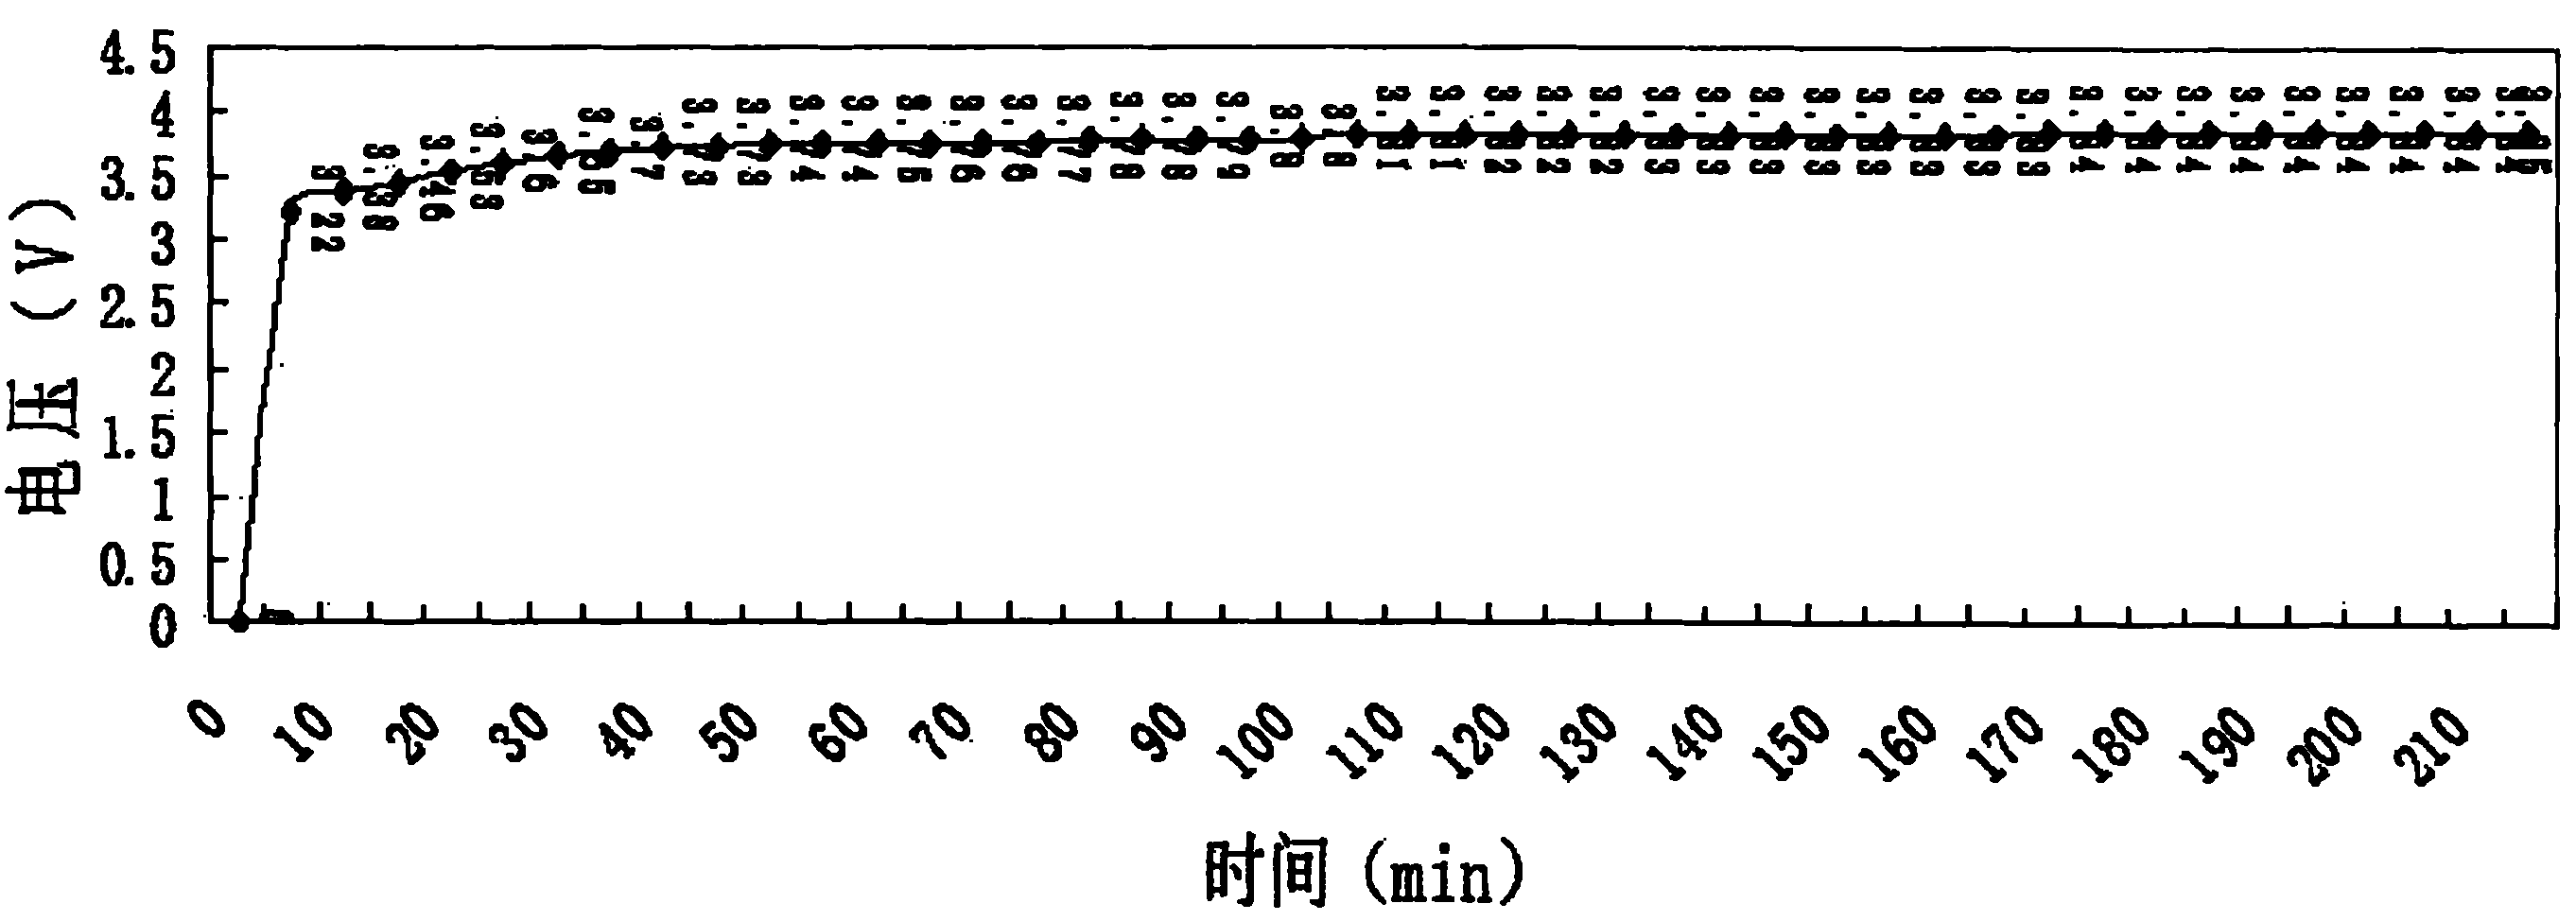 Pre-charging method of lithium ion battery with cobalt acid lithium as positive active material